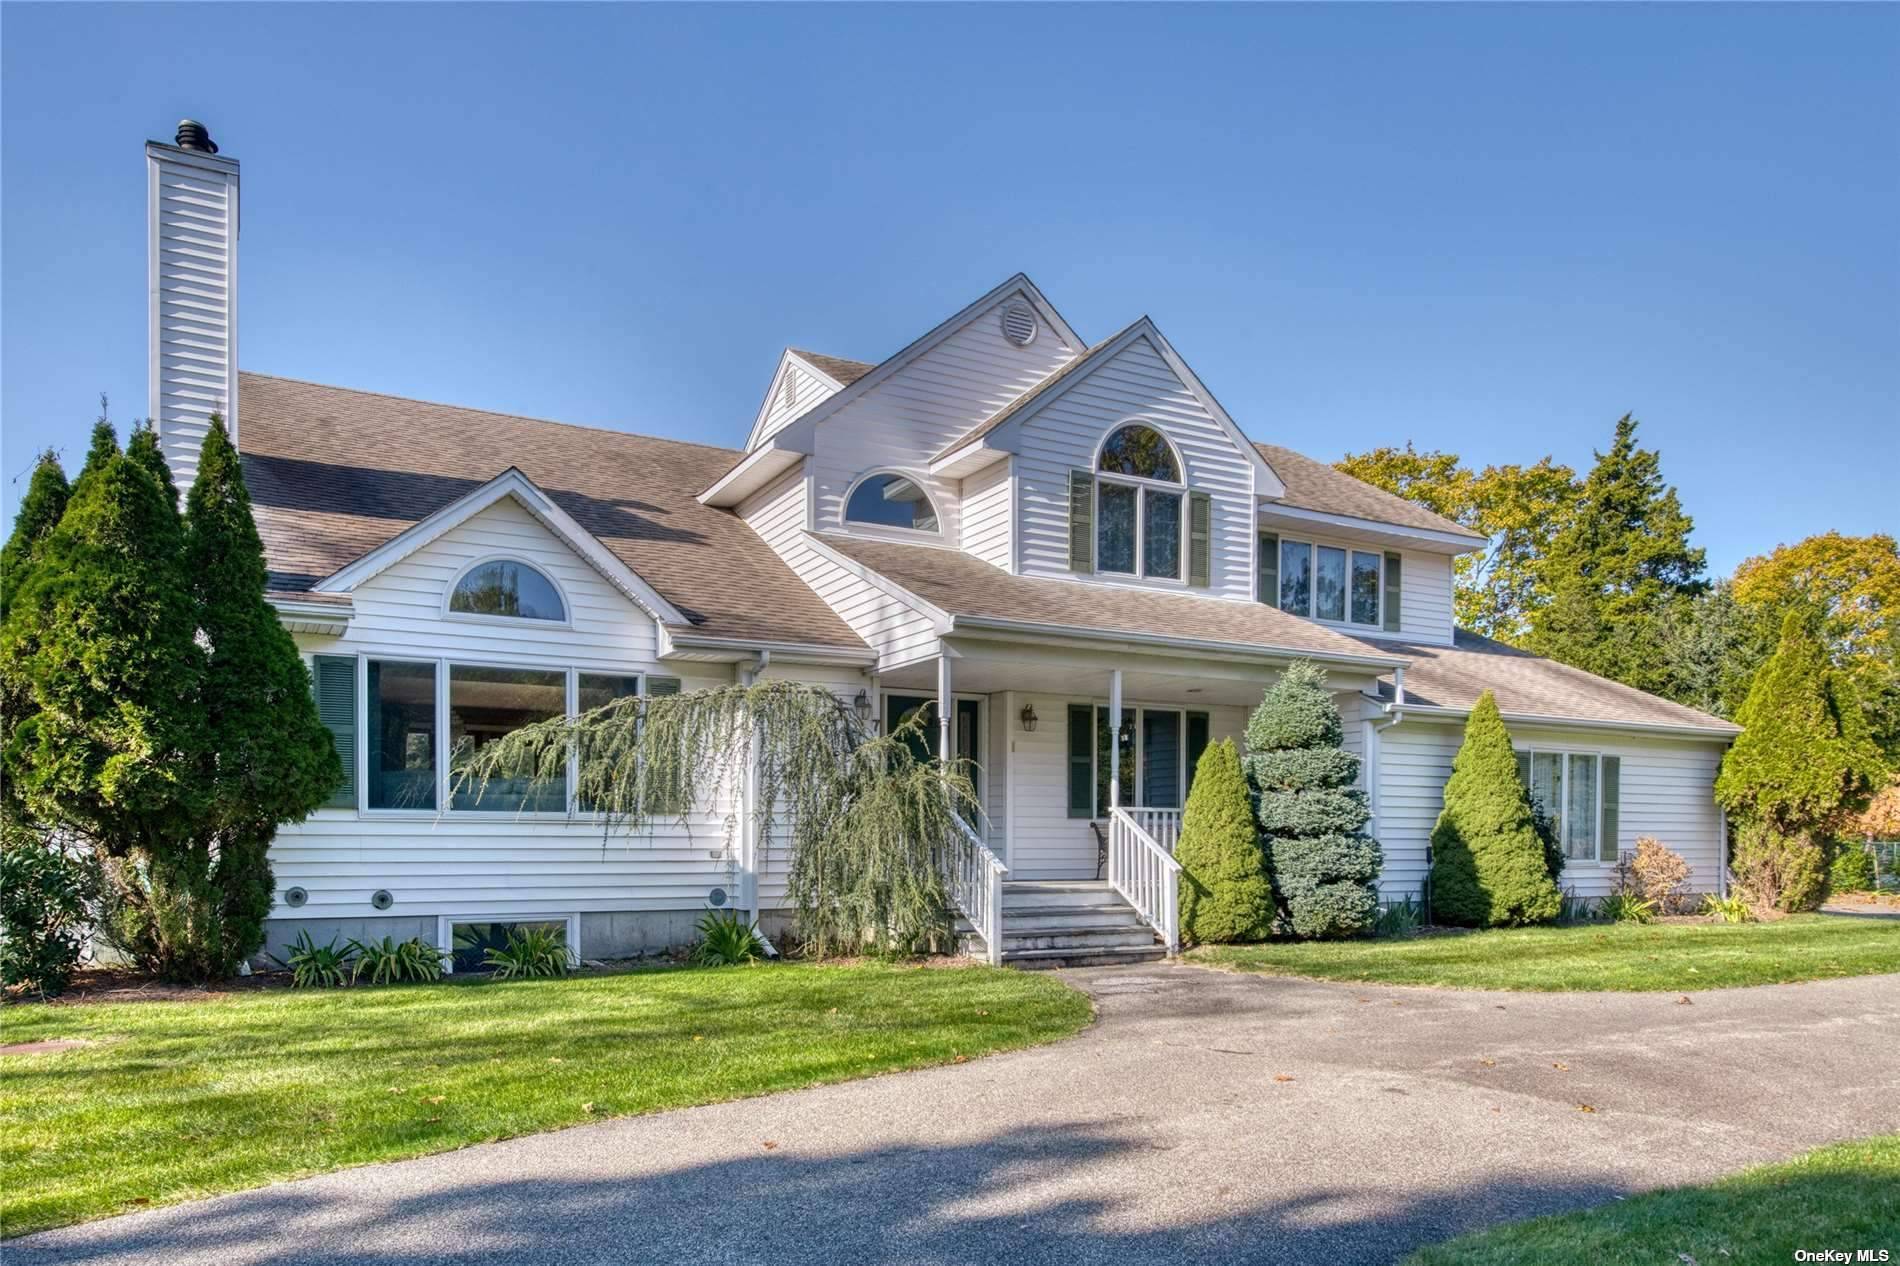 Enjoy your summer in Westhampton in this spacious 5 bedroom, 3 1 2 bath home perfect for entertaining, both indoors or out.